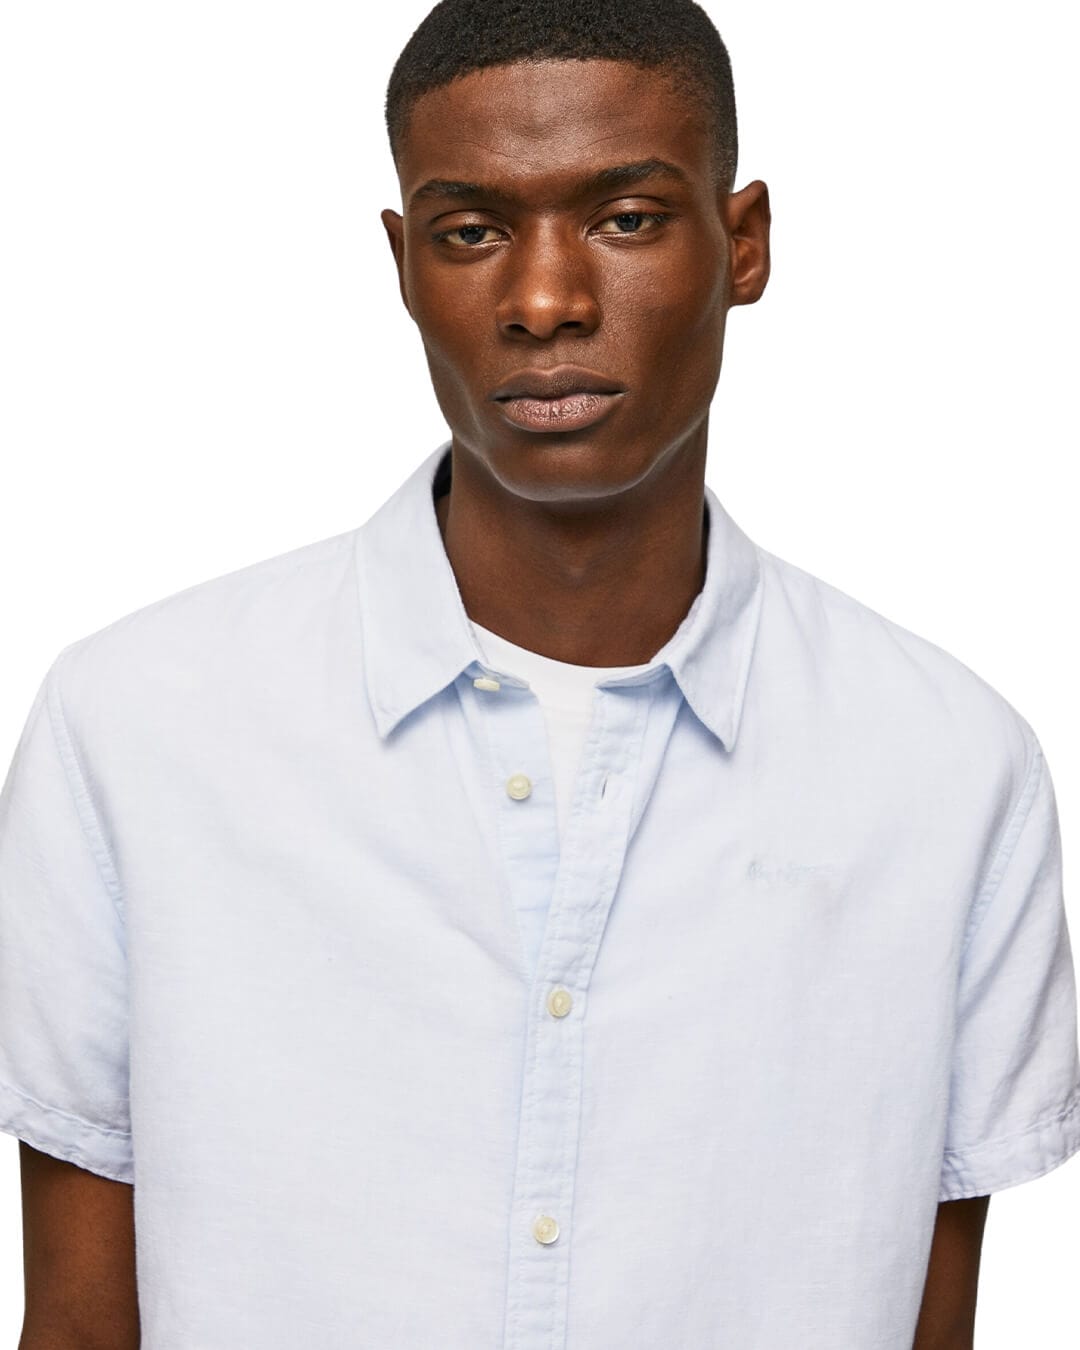 Pepe Jeans Shirts Pepe Jeans Luther Slim Fit Blue Plain Shirt